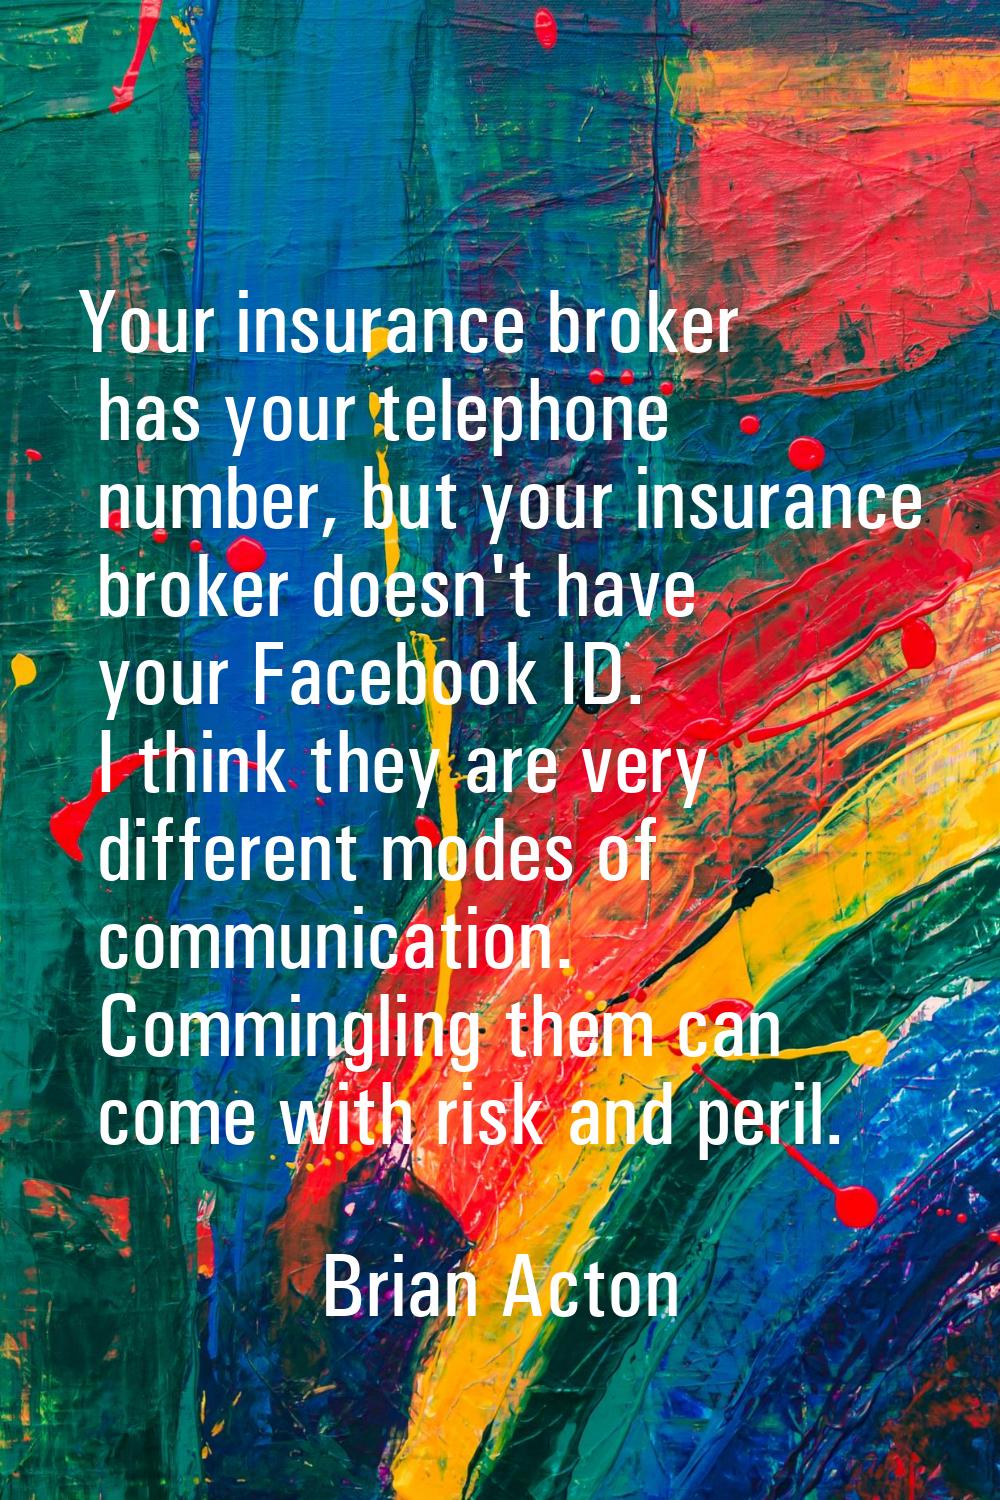 Your insurance broker has your telephone number, but your insurance broker doesn't have your Facebo